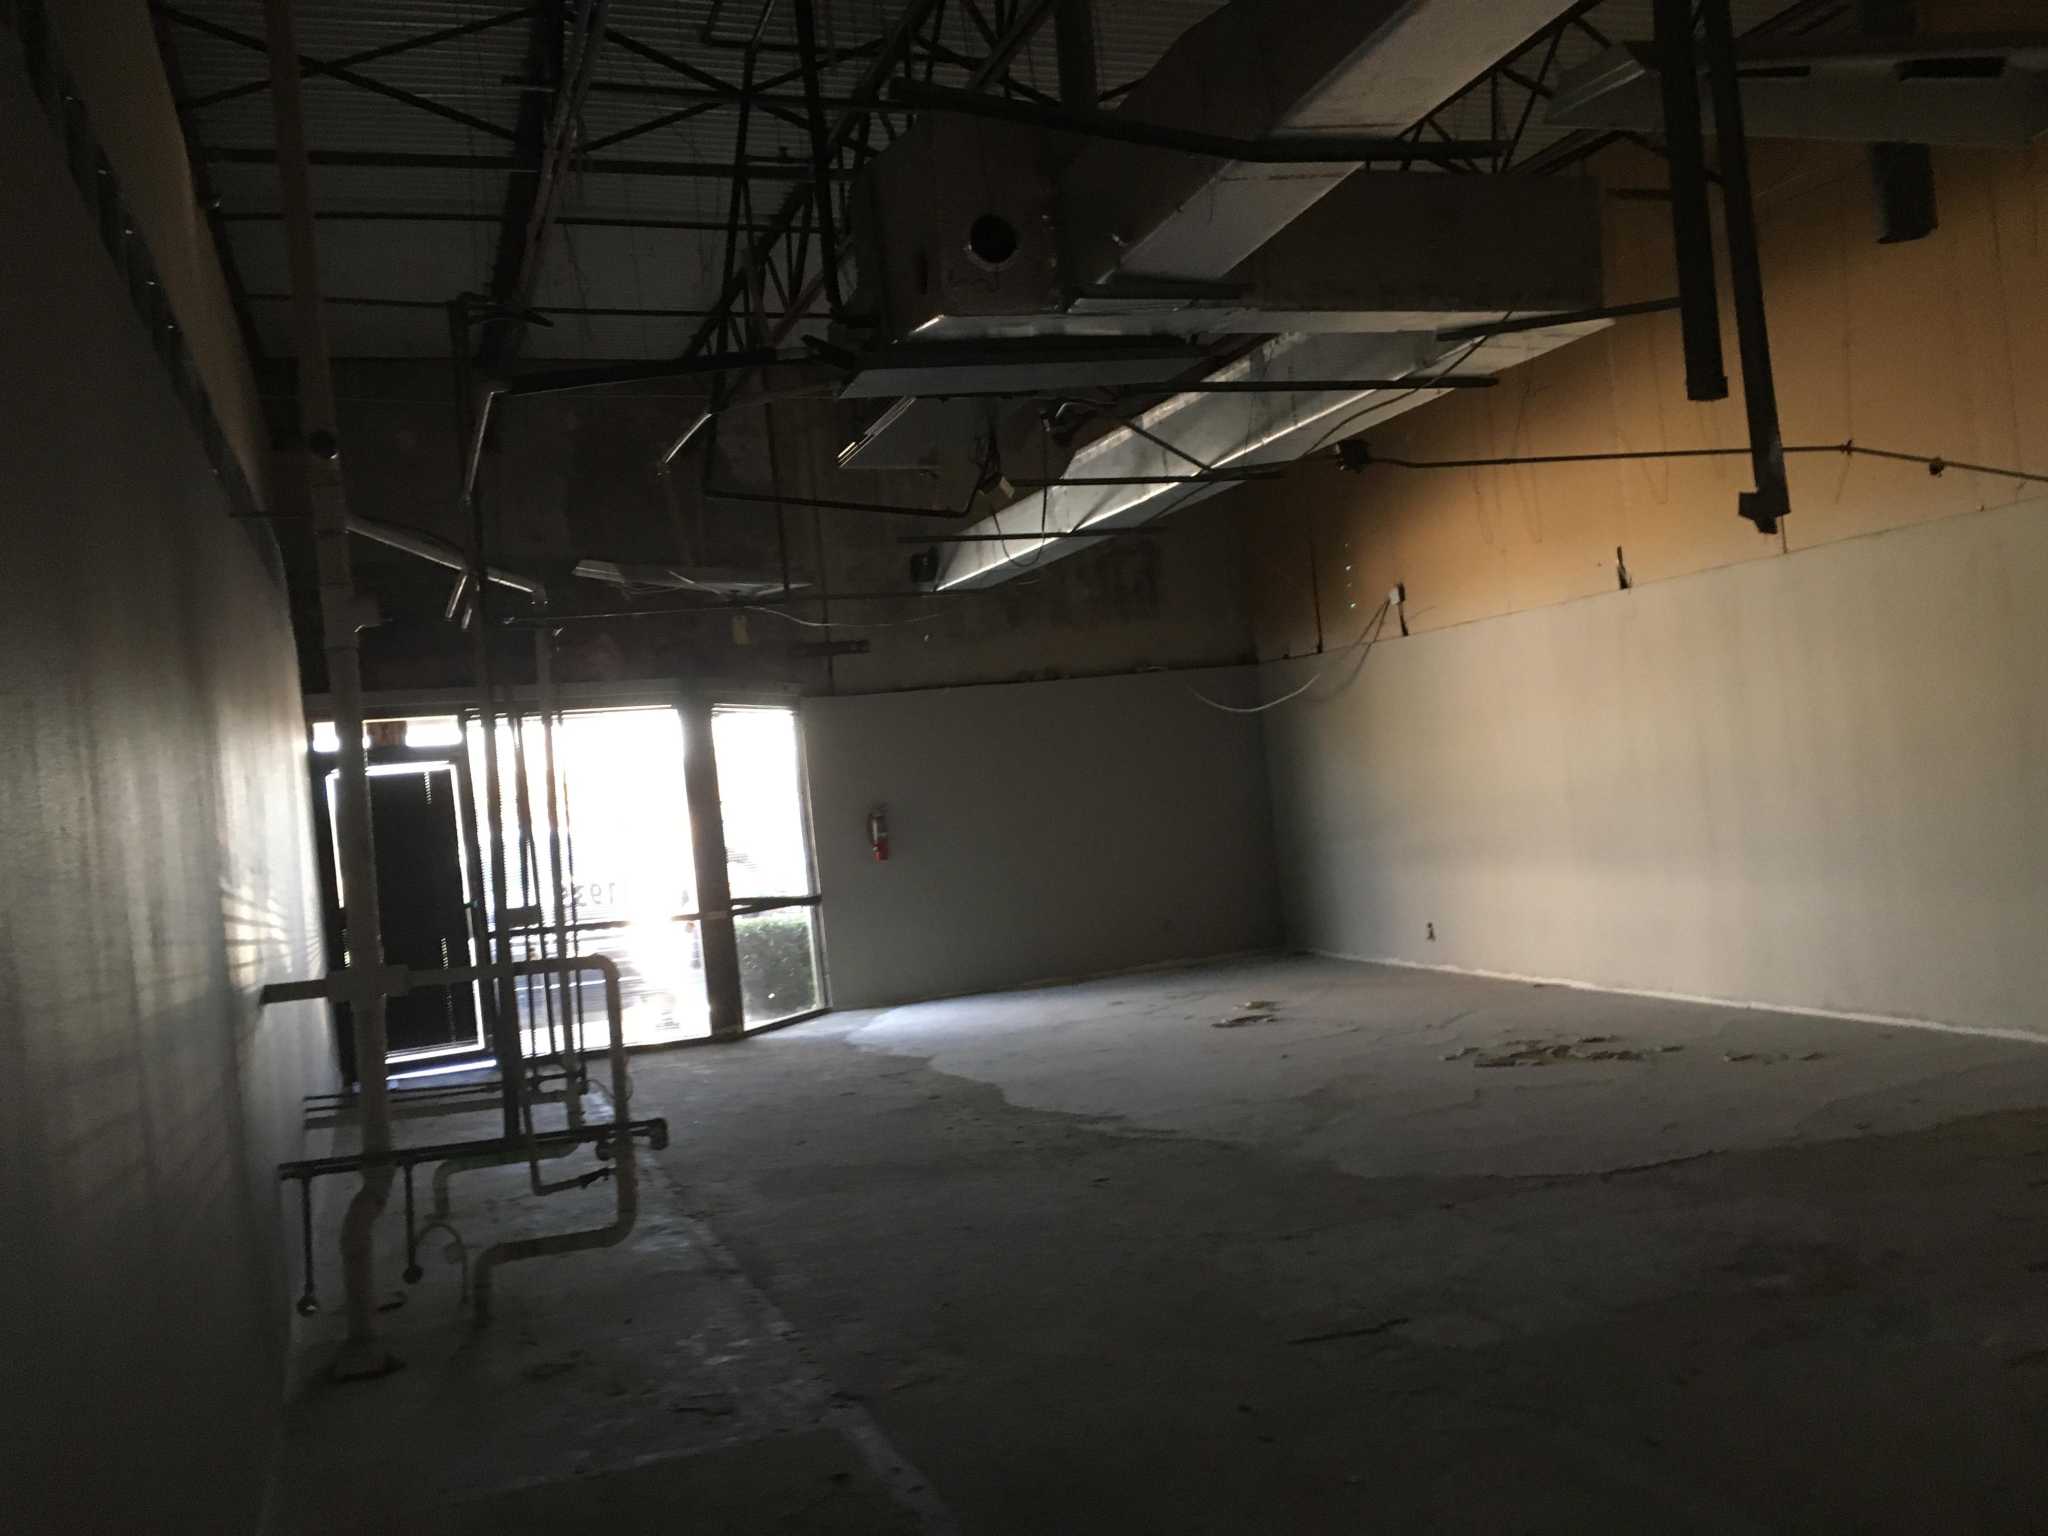 New San Antonio brewery Brew Monkey Beer Co. to open Aug. 29 on Starcrest  on Northeast Side